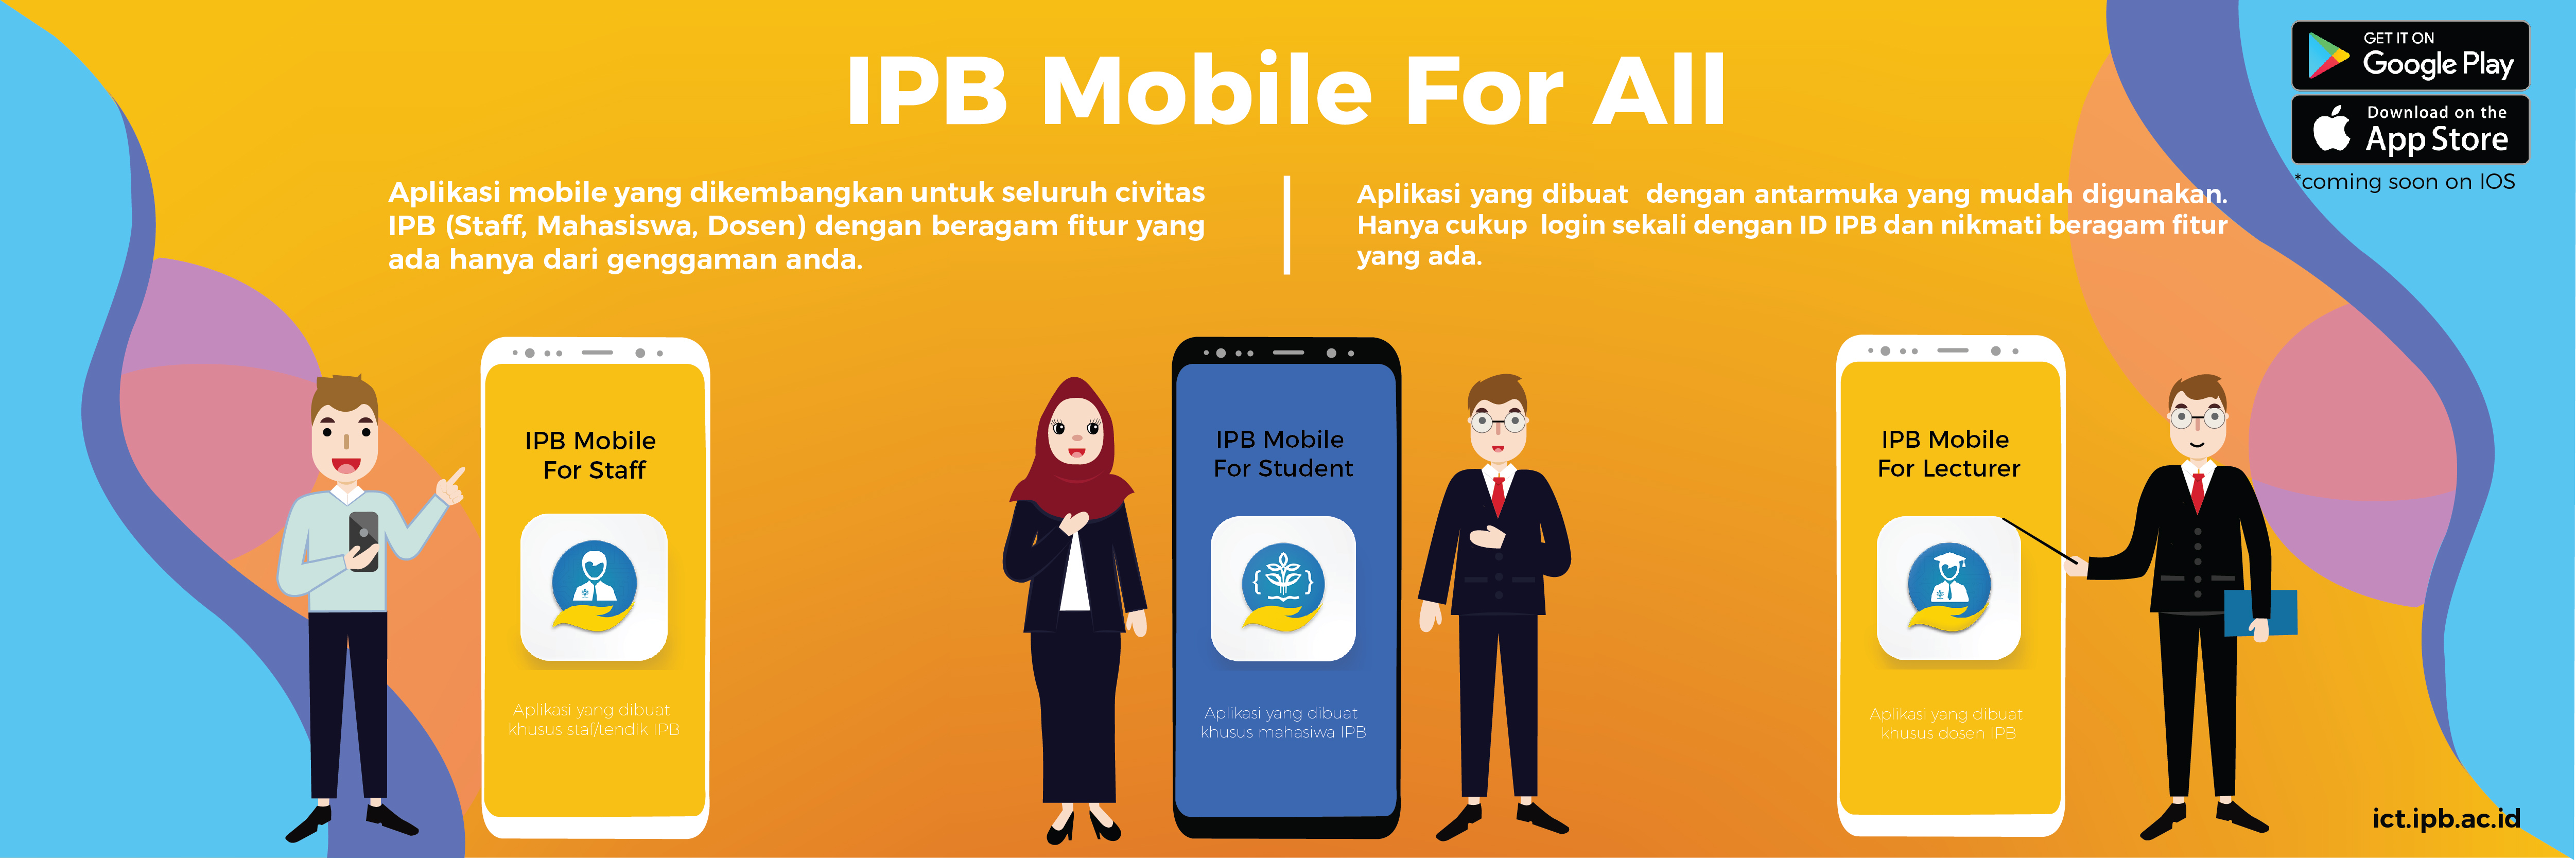 IPB Mobile For All